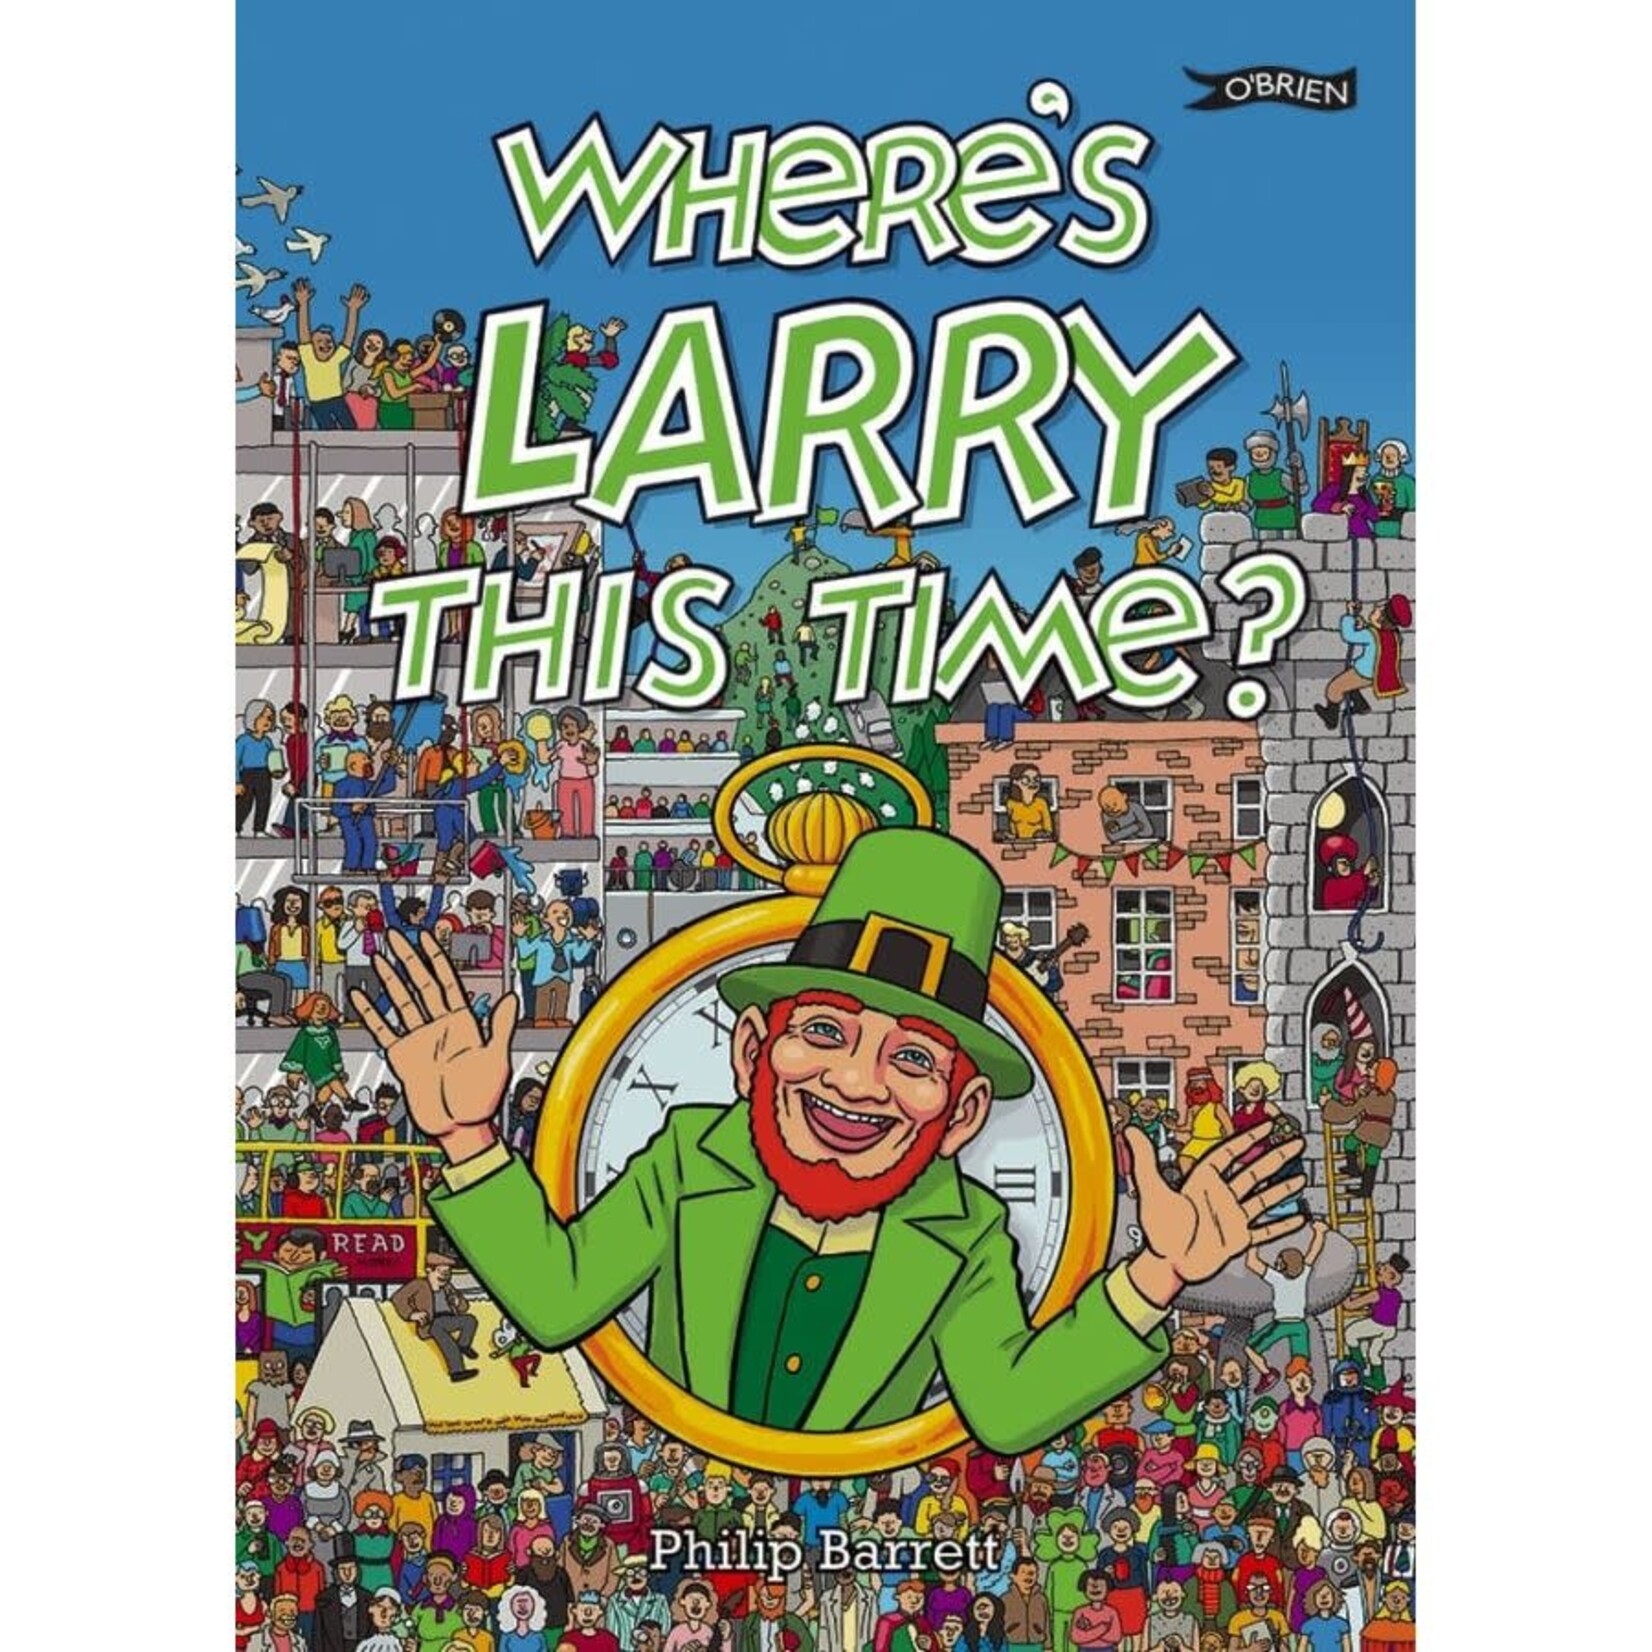 Celtic Books "Where's Larry This Time?"